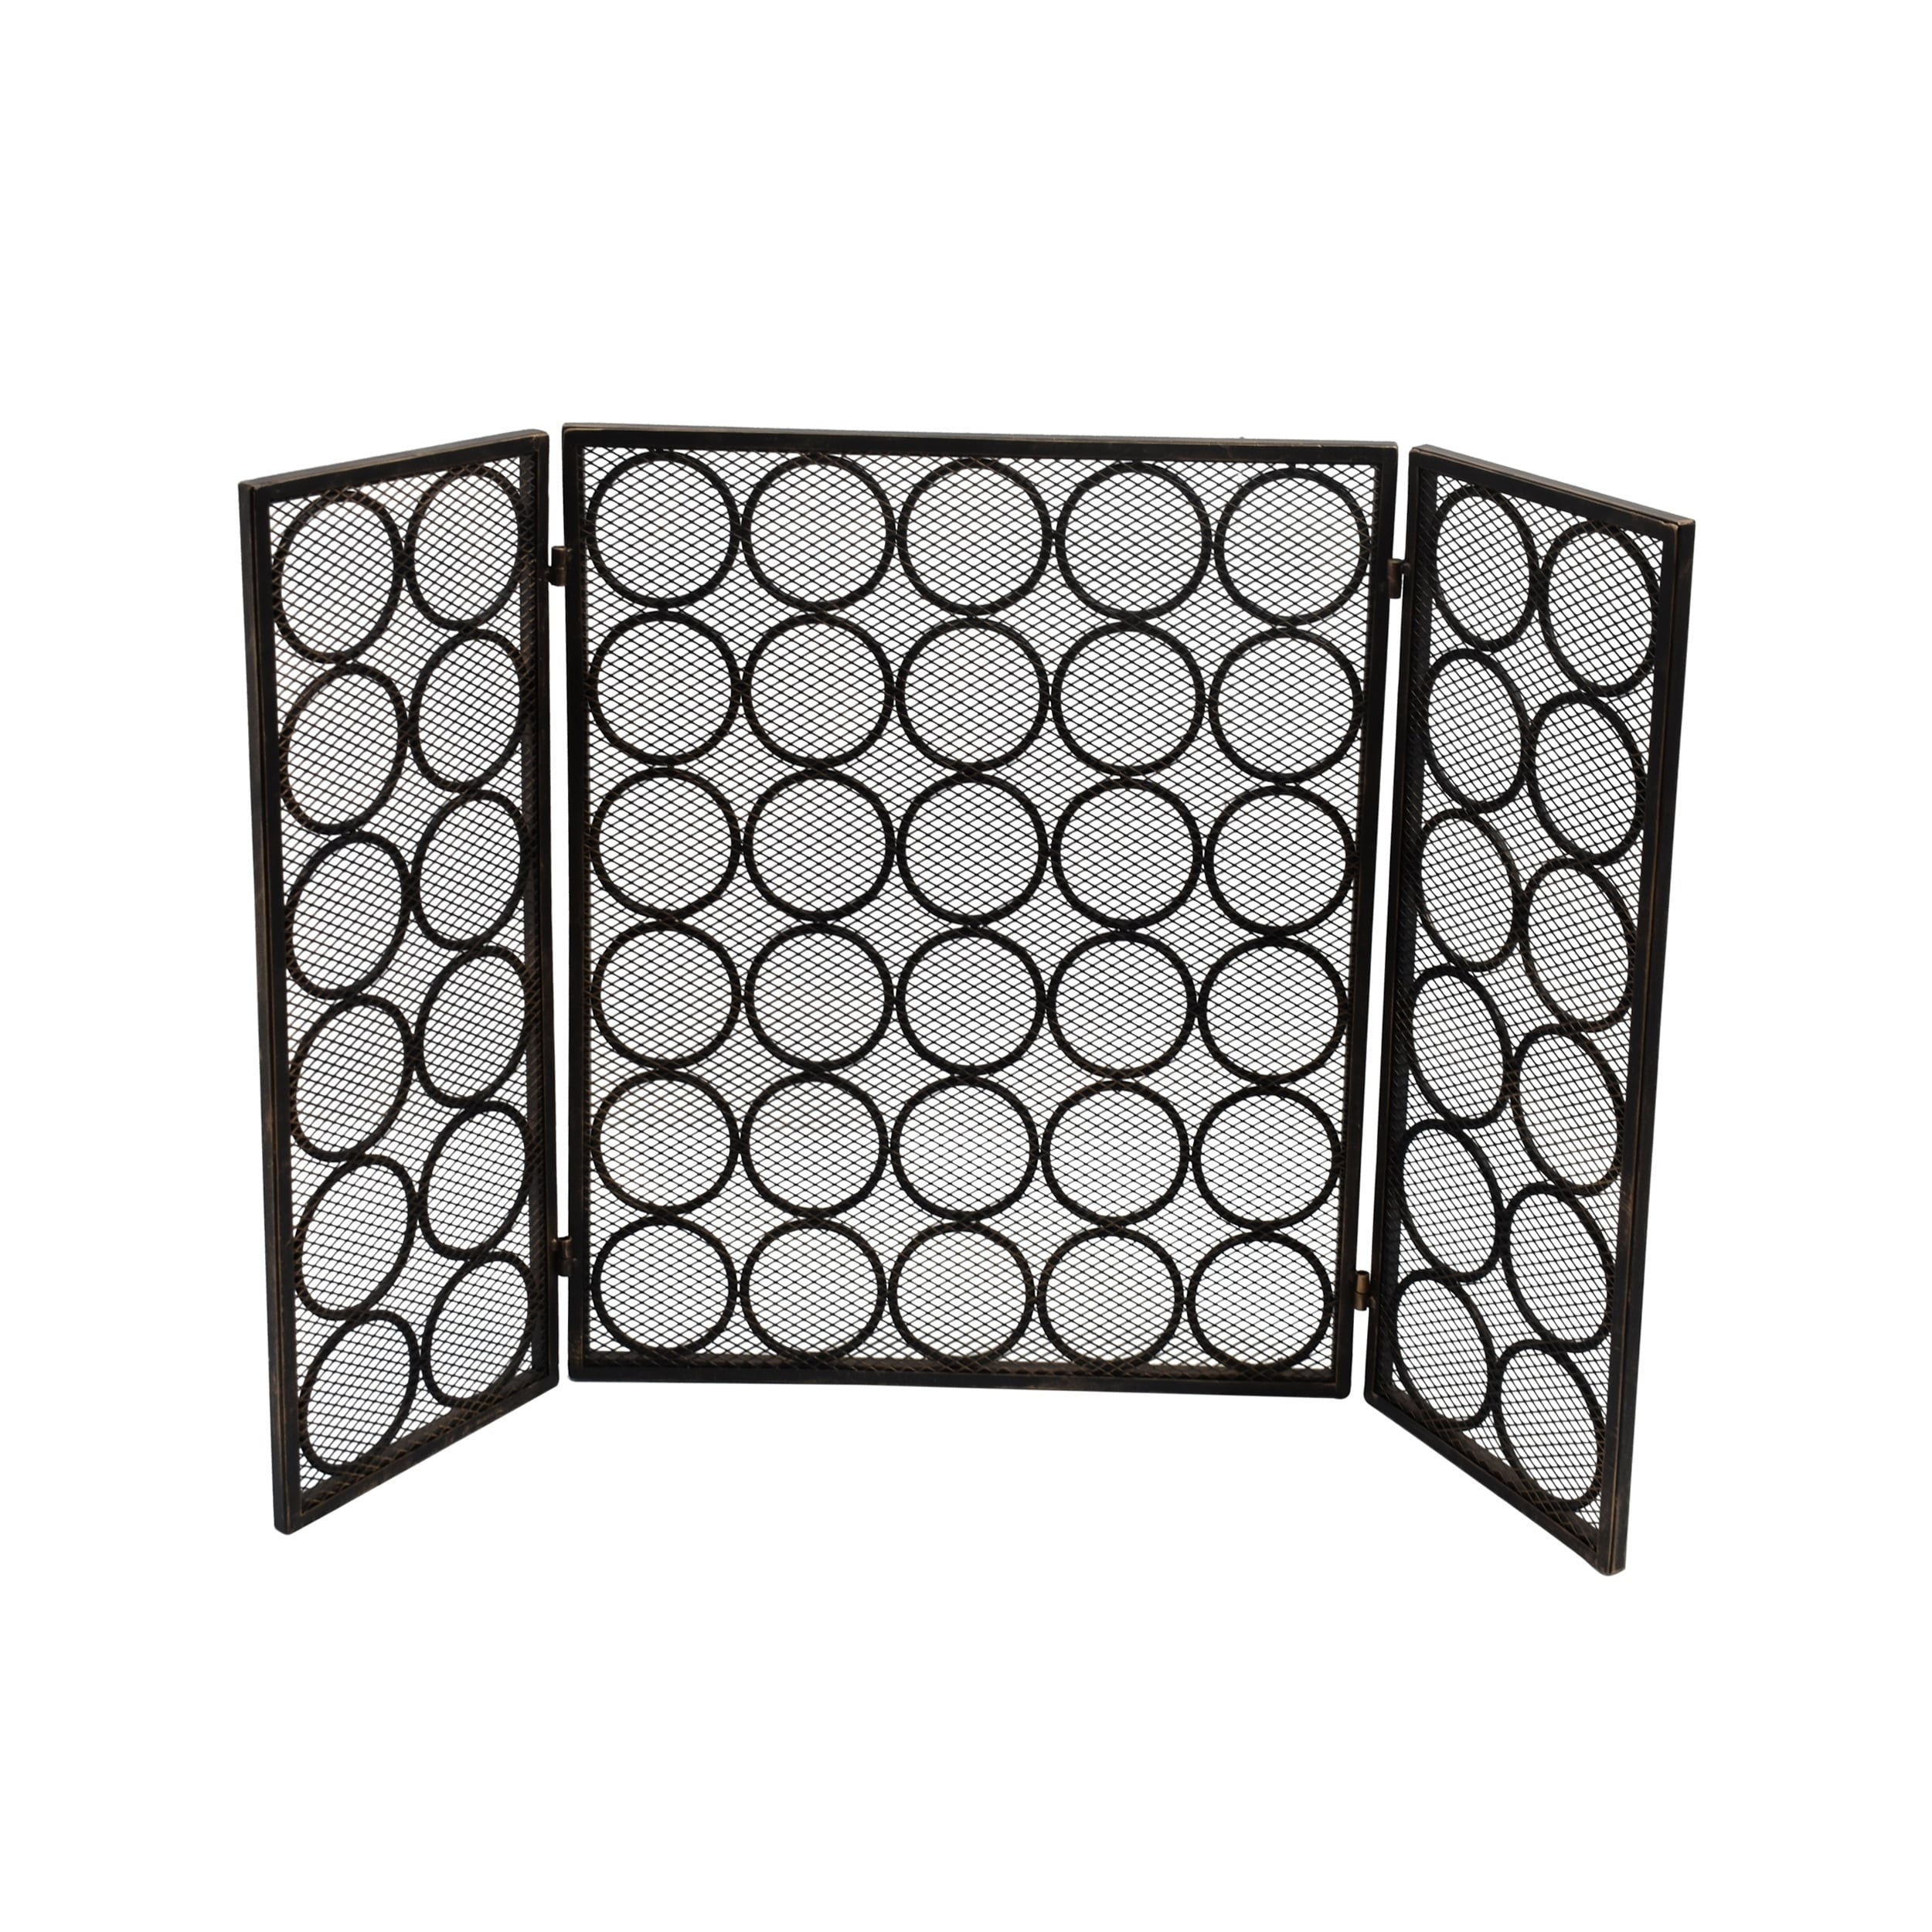 Hartly Modern Three Panel Fireplace screen by Christopher Knight Home  30.00